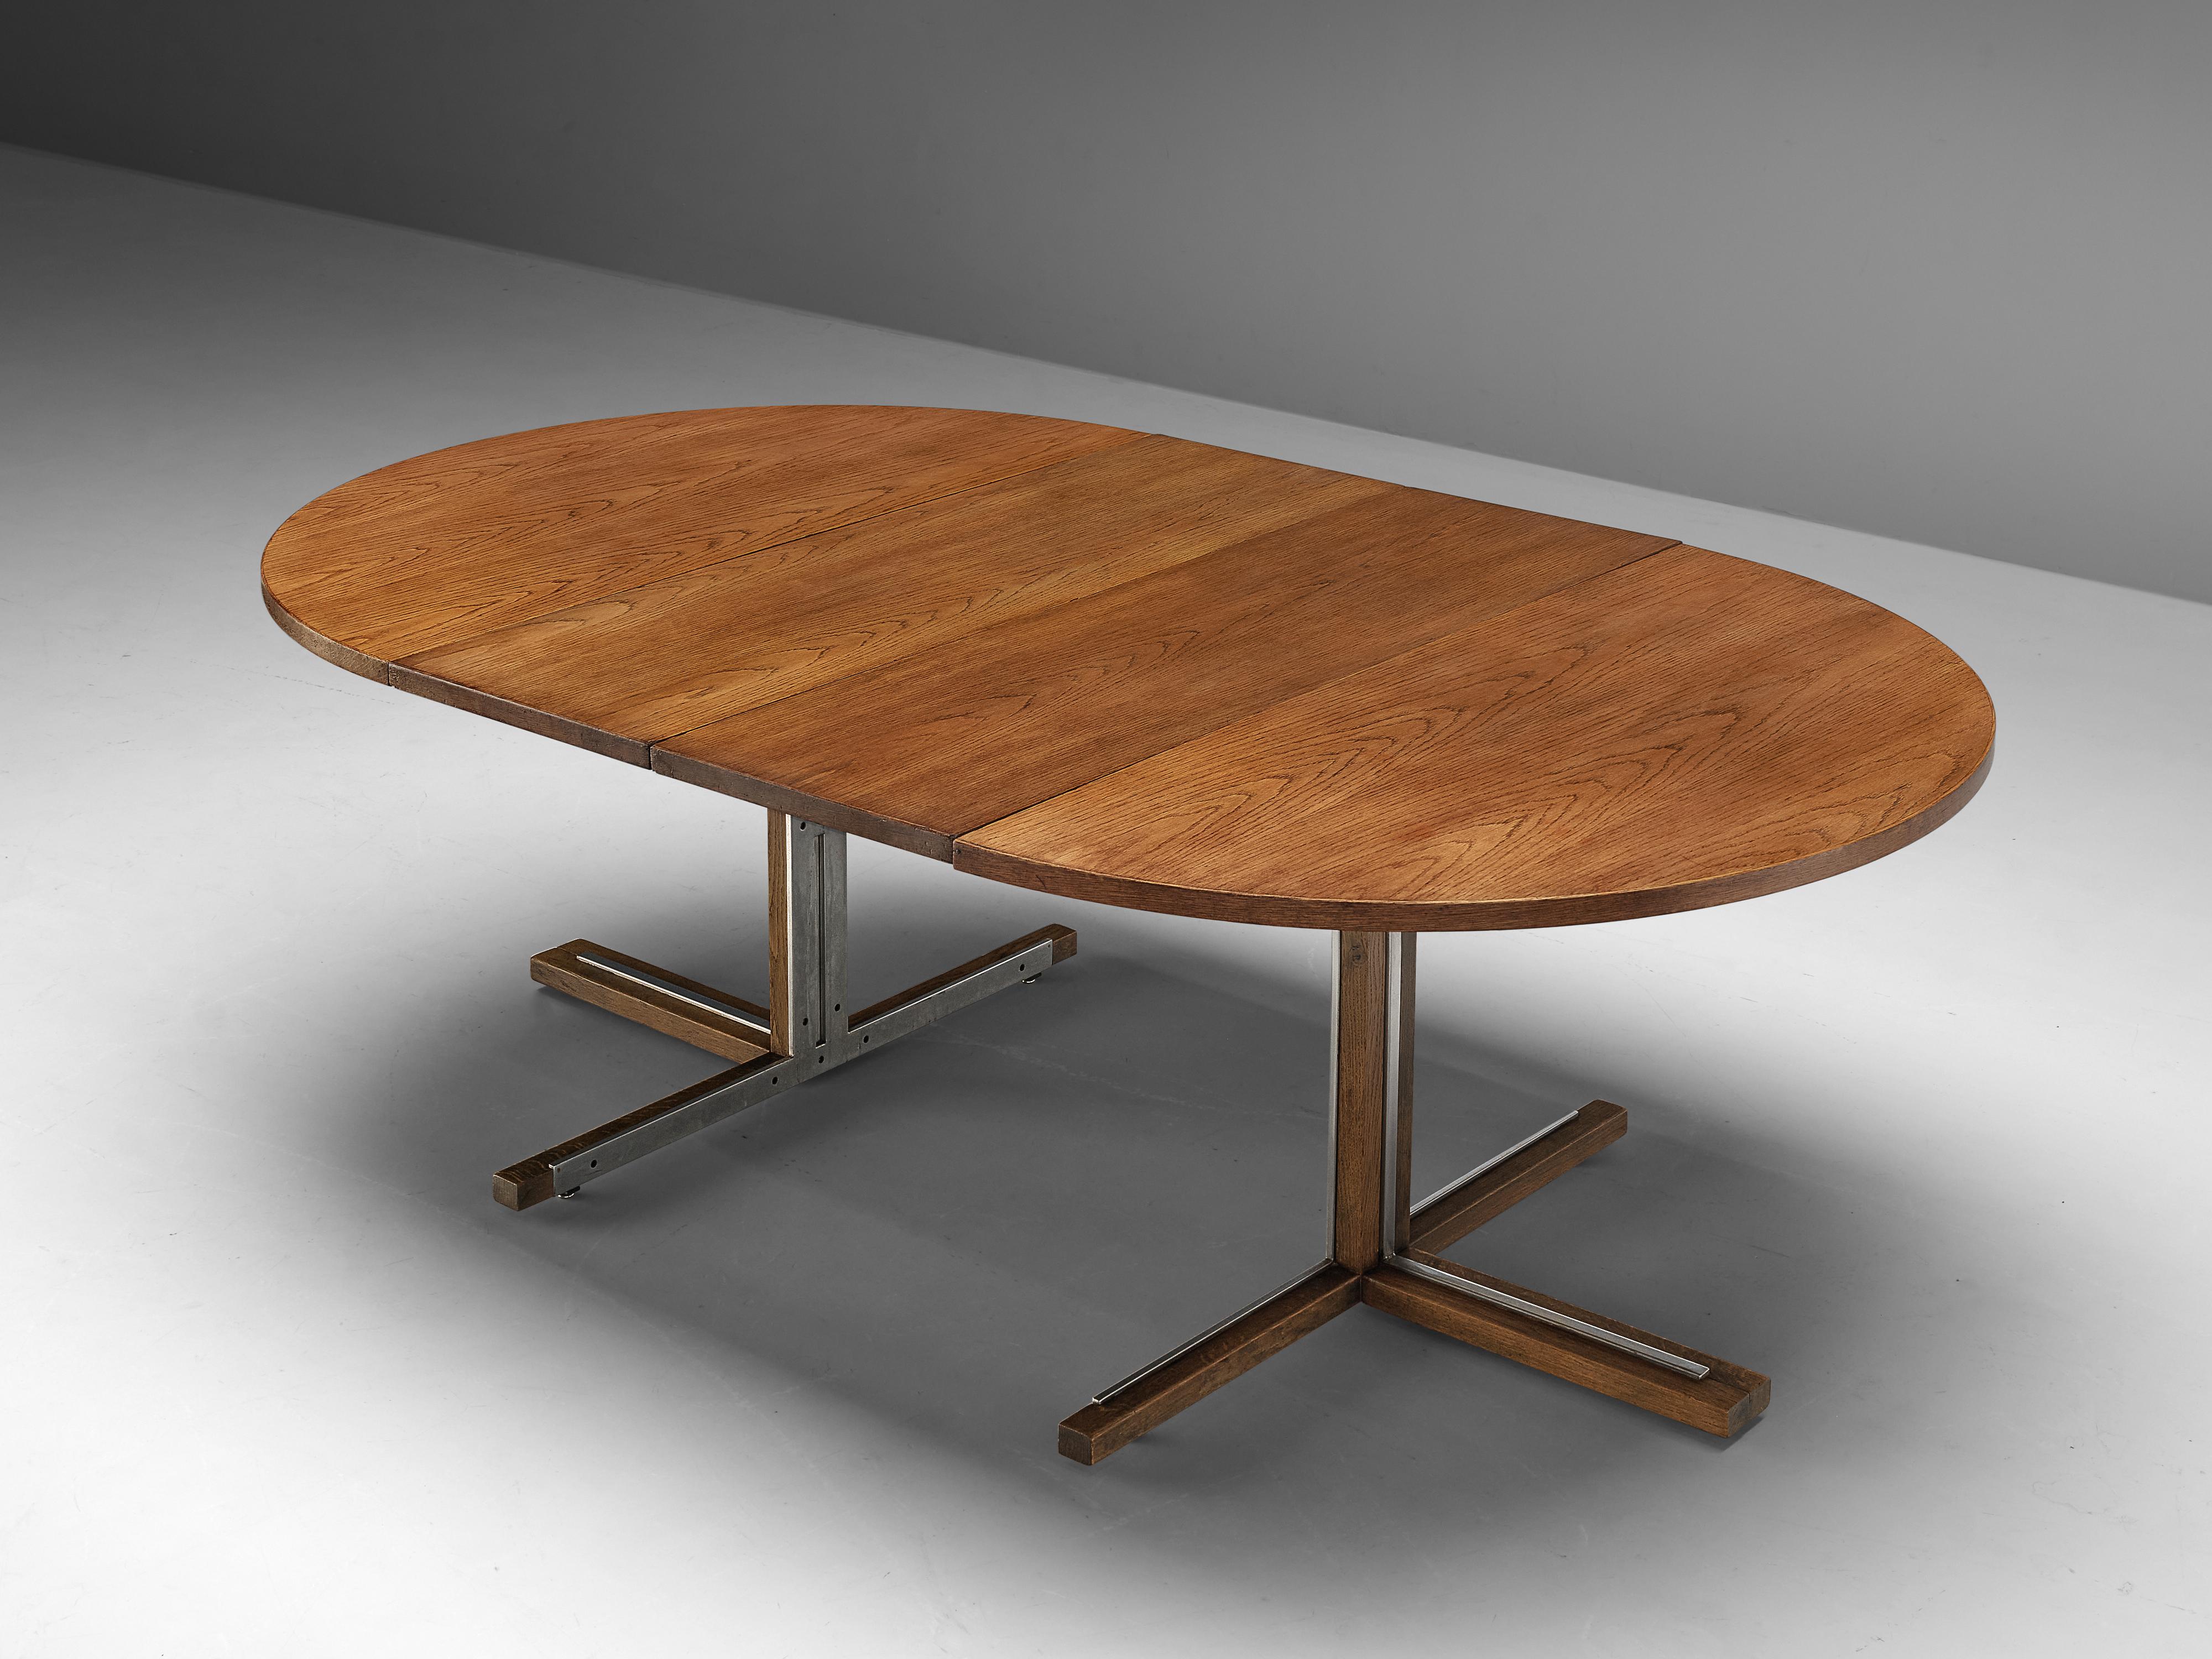 Dining table, oak, metal, Italy, 1970s

Beautiful dining table with extendable feature. When in its smallest form, the table has a round form and the legs create a cross. However, if it is extended, it turns into a great oval shape and the crossed